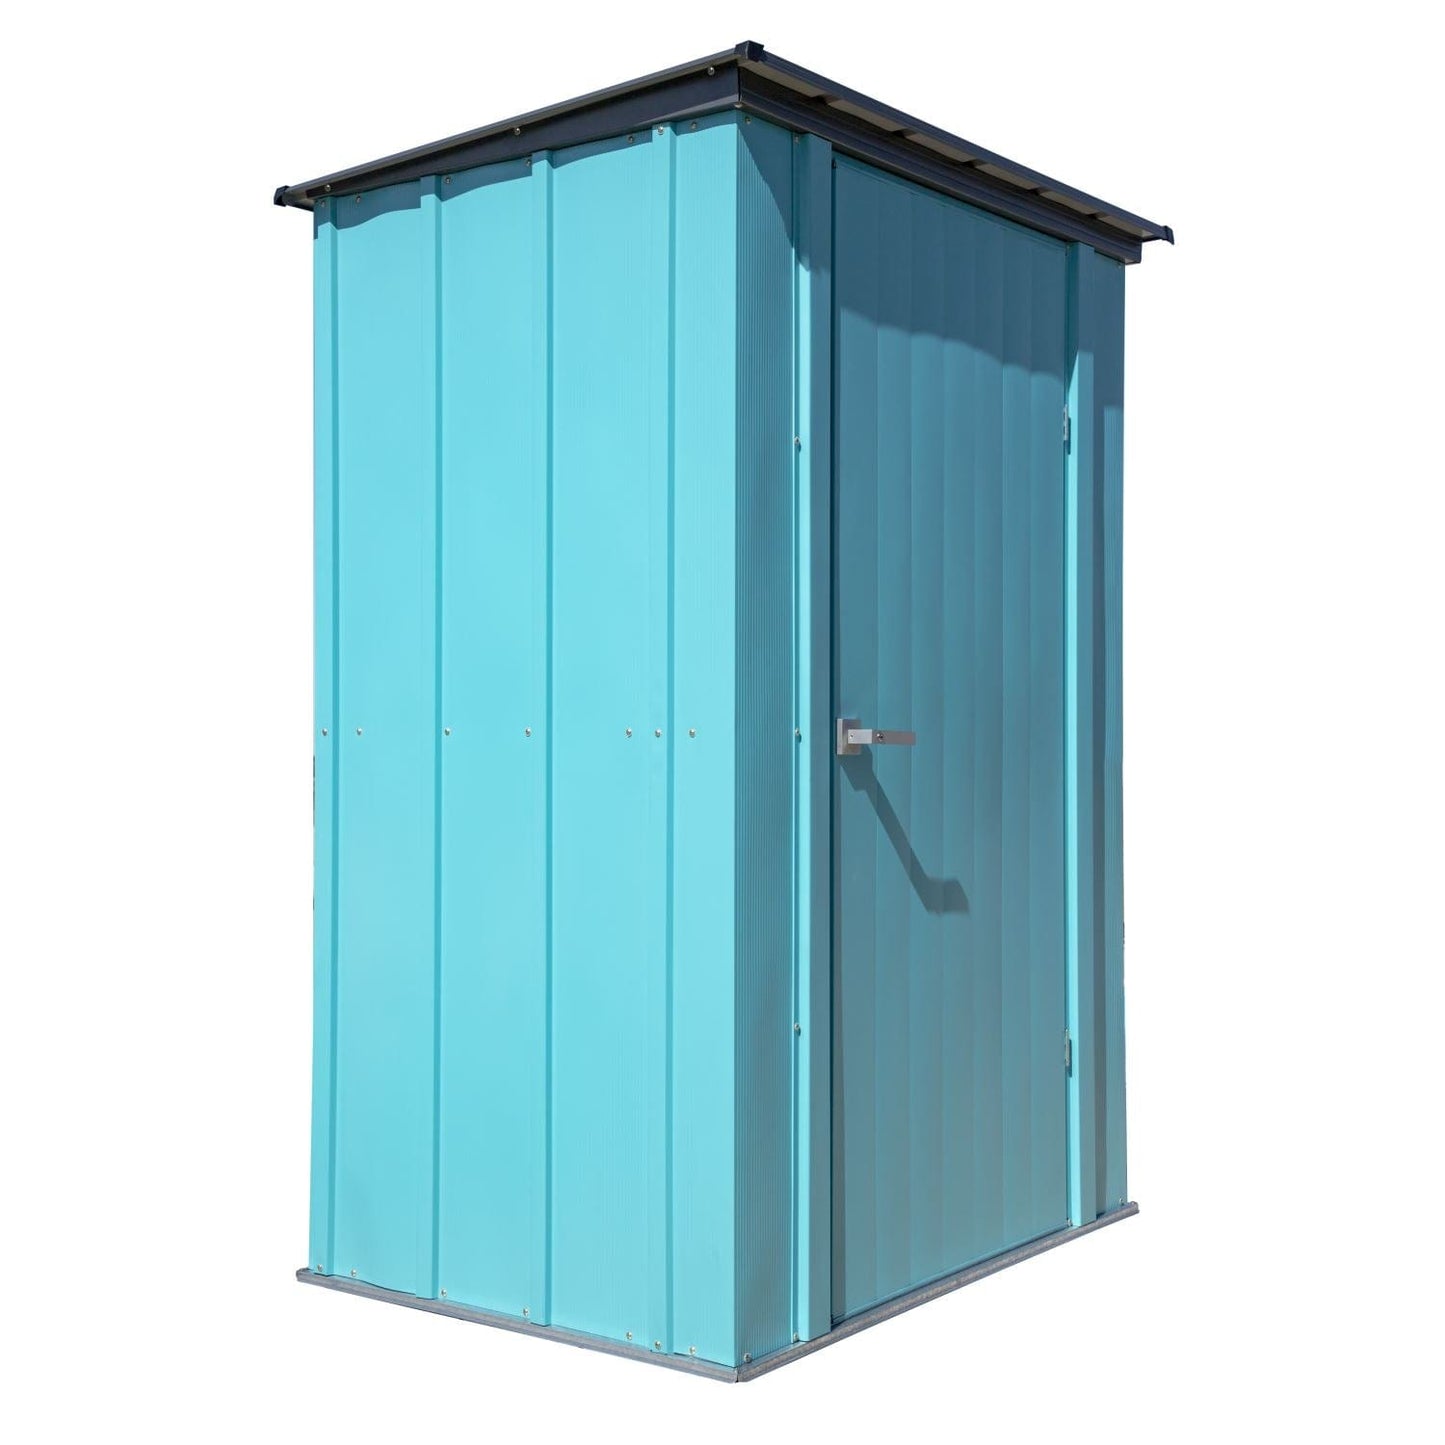 Spacemaker Patio Shed, 4' x 3' - Teal and Anthracite - mygreenhousestore.com